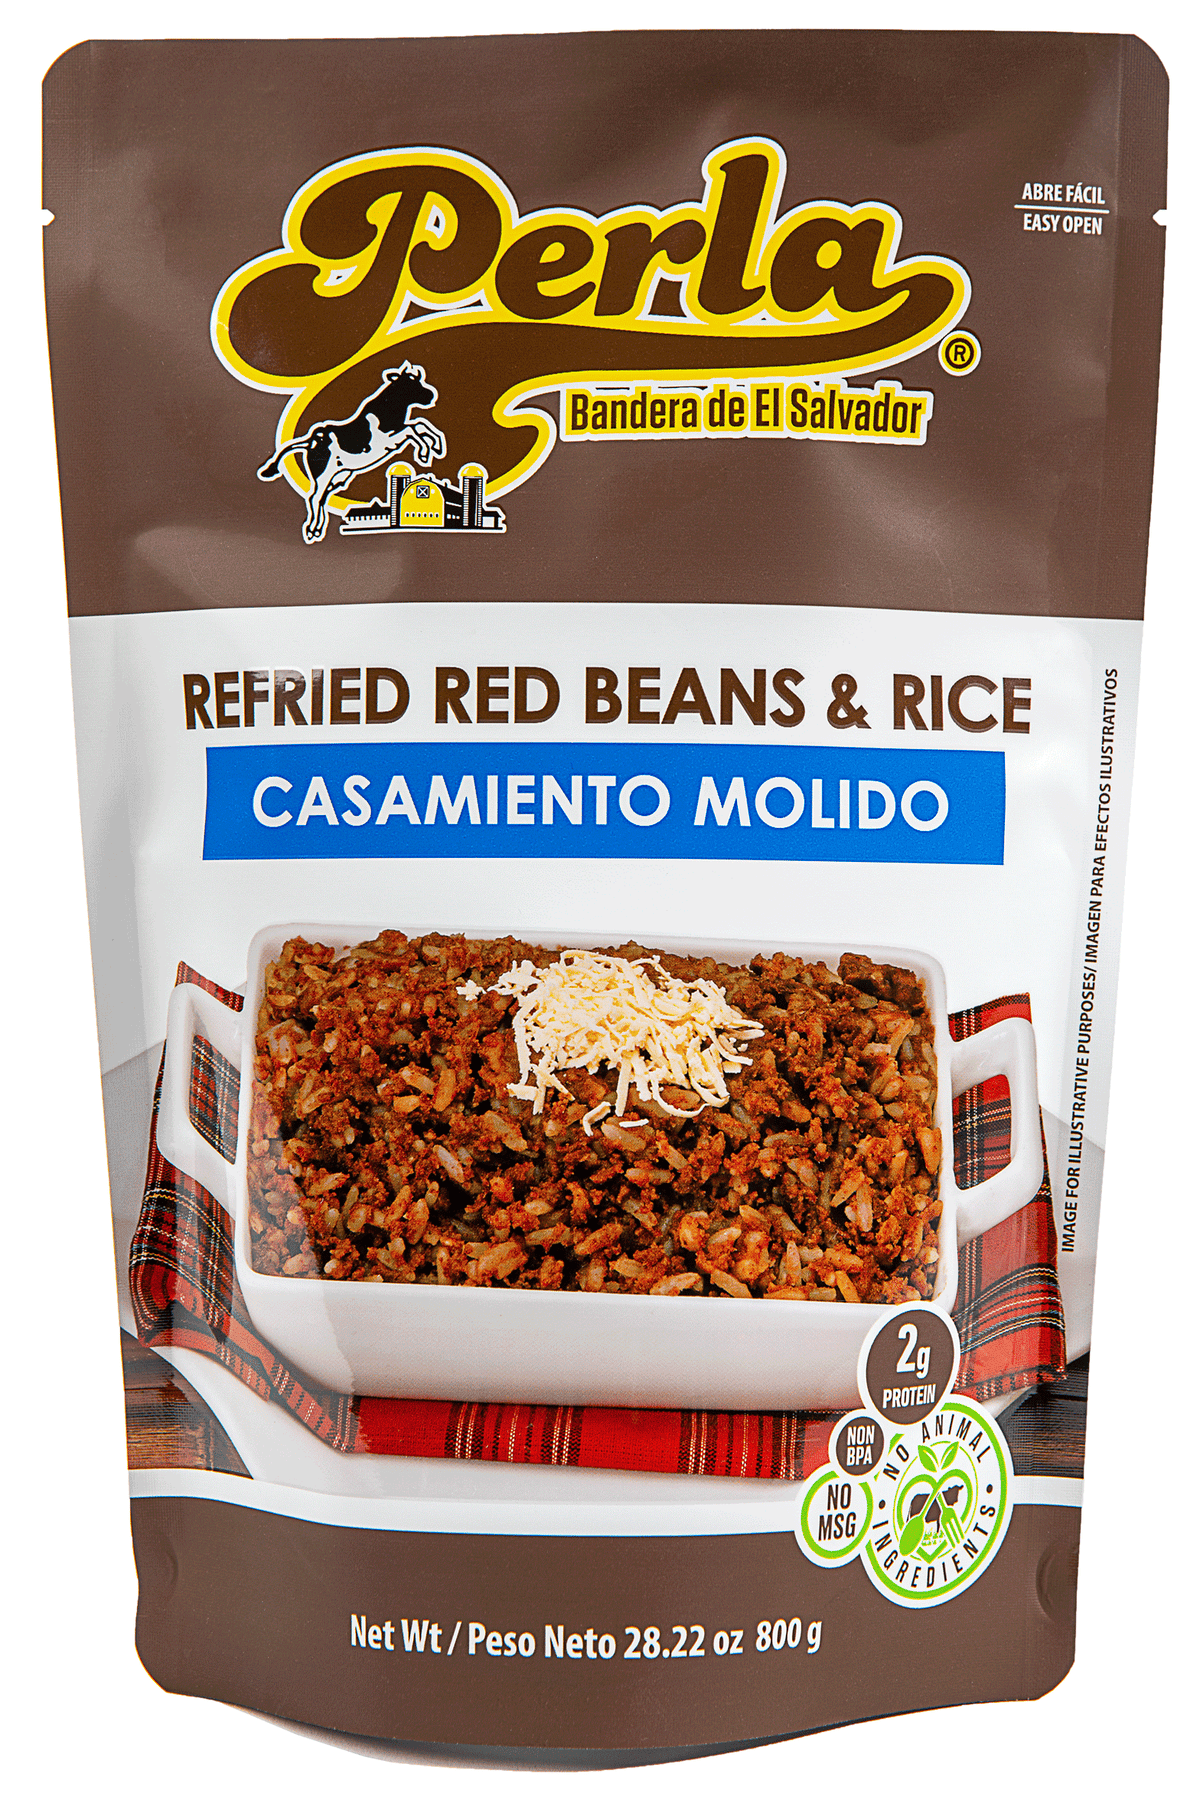 Perla Refried Red Beans & Rice Style Mix (Casamiento Molido) 28.22 oz